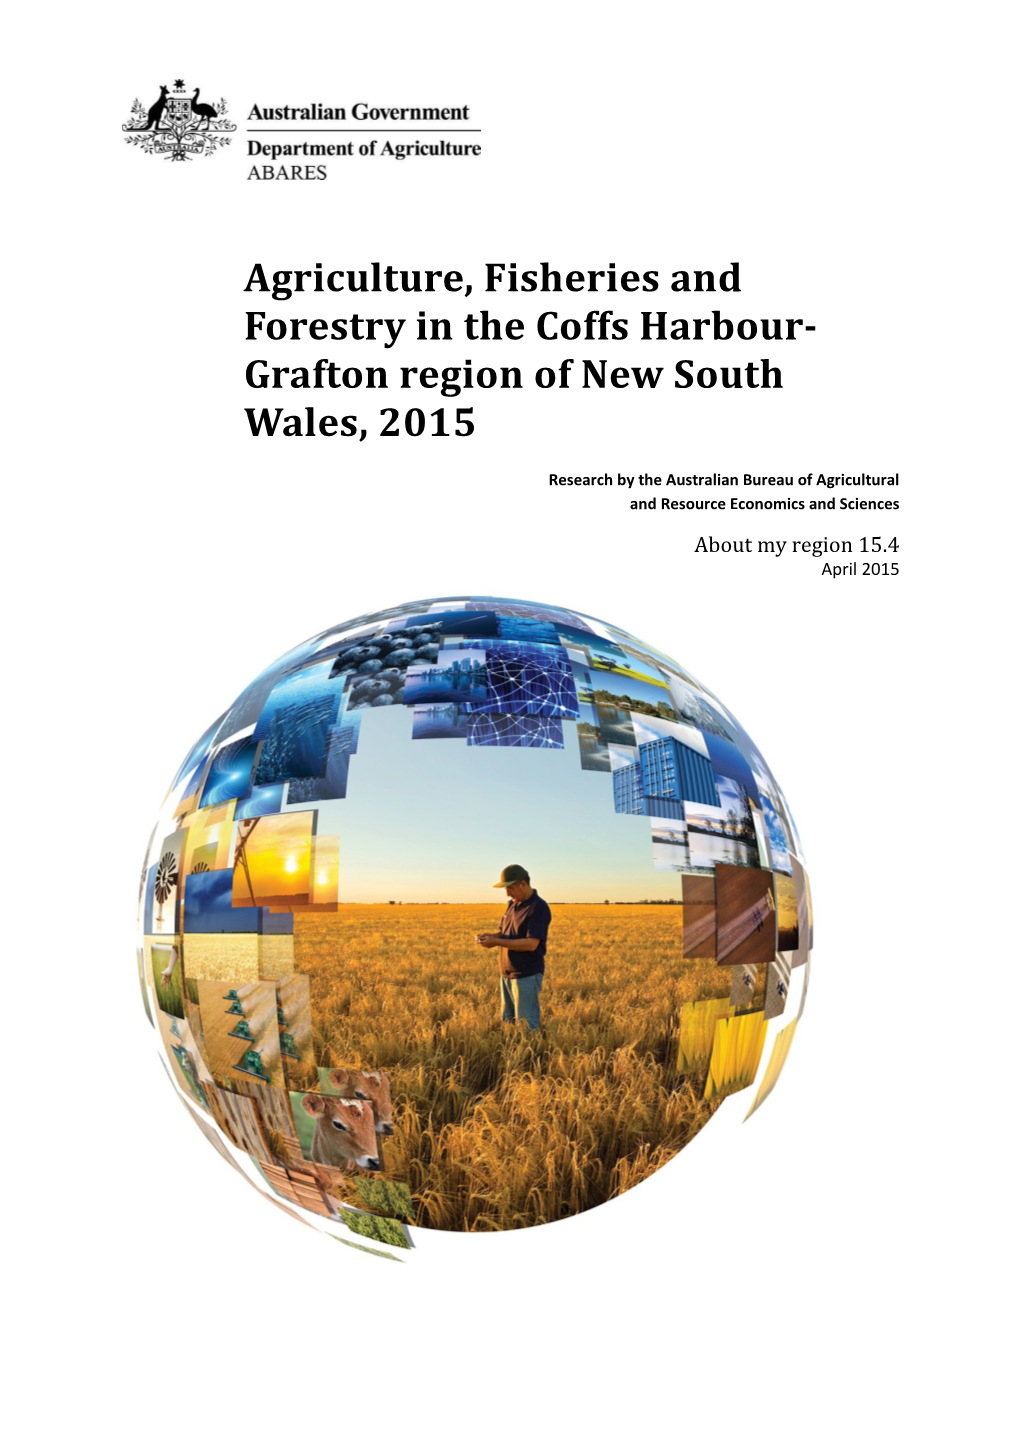 Agriculture, Fisheries and Forestry in the Coffs Harbour-Grafton Region of New South Wales